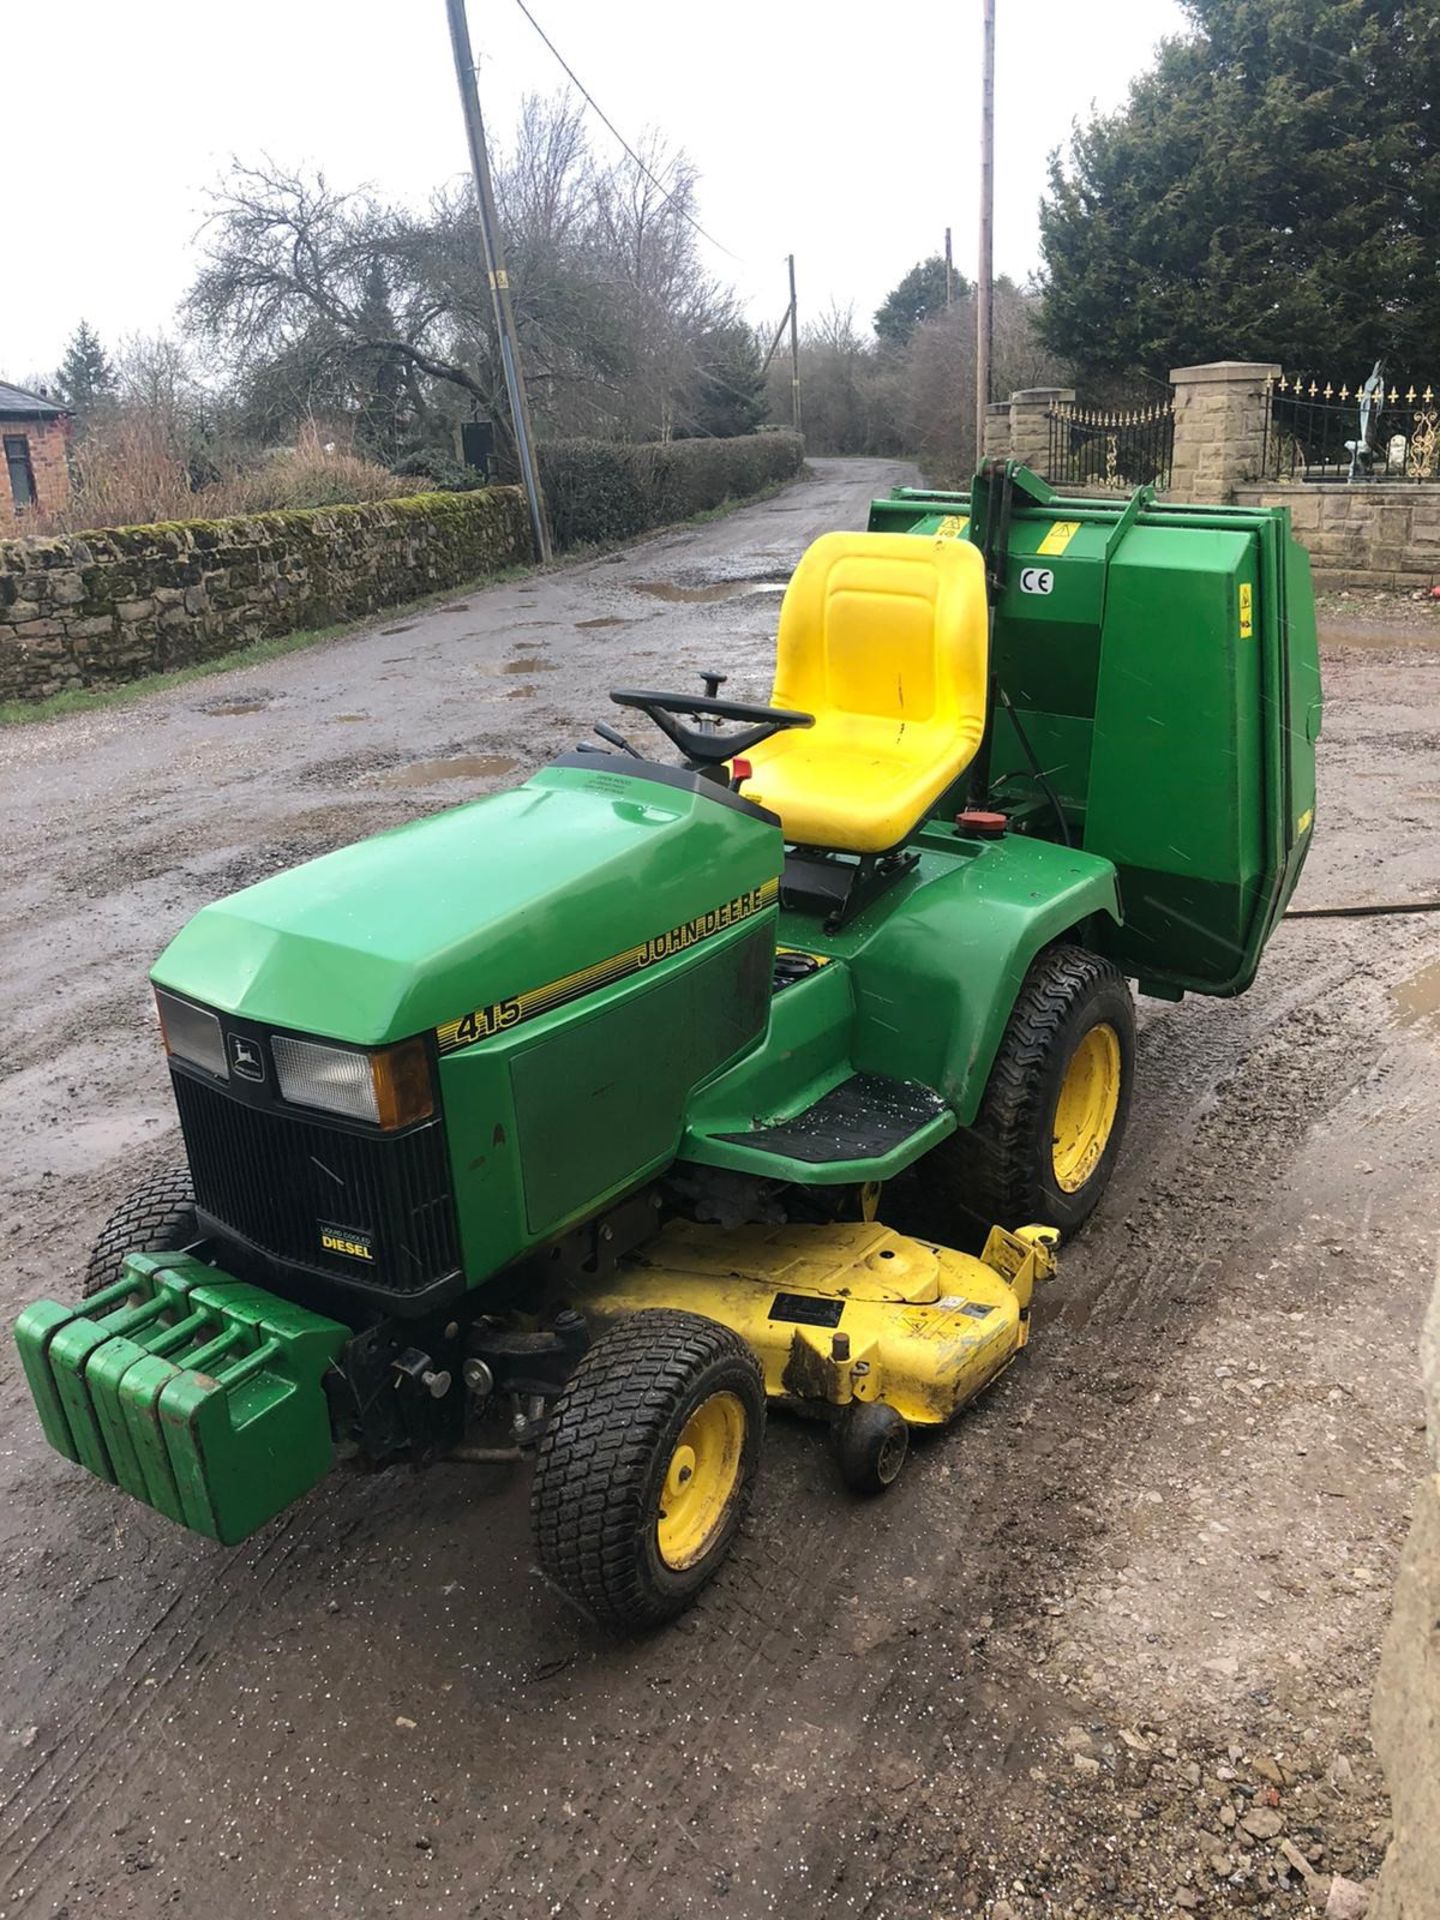 JOHN DEERE 415 RIDE ON LAWN MOWER, RUNS & WORKS, CUTS AND COLLECTS WELL *NO VAT* - Image 7 of 8